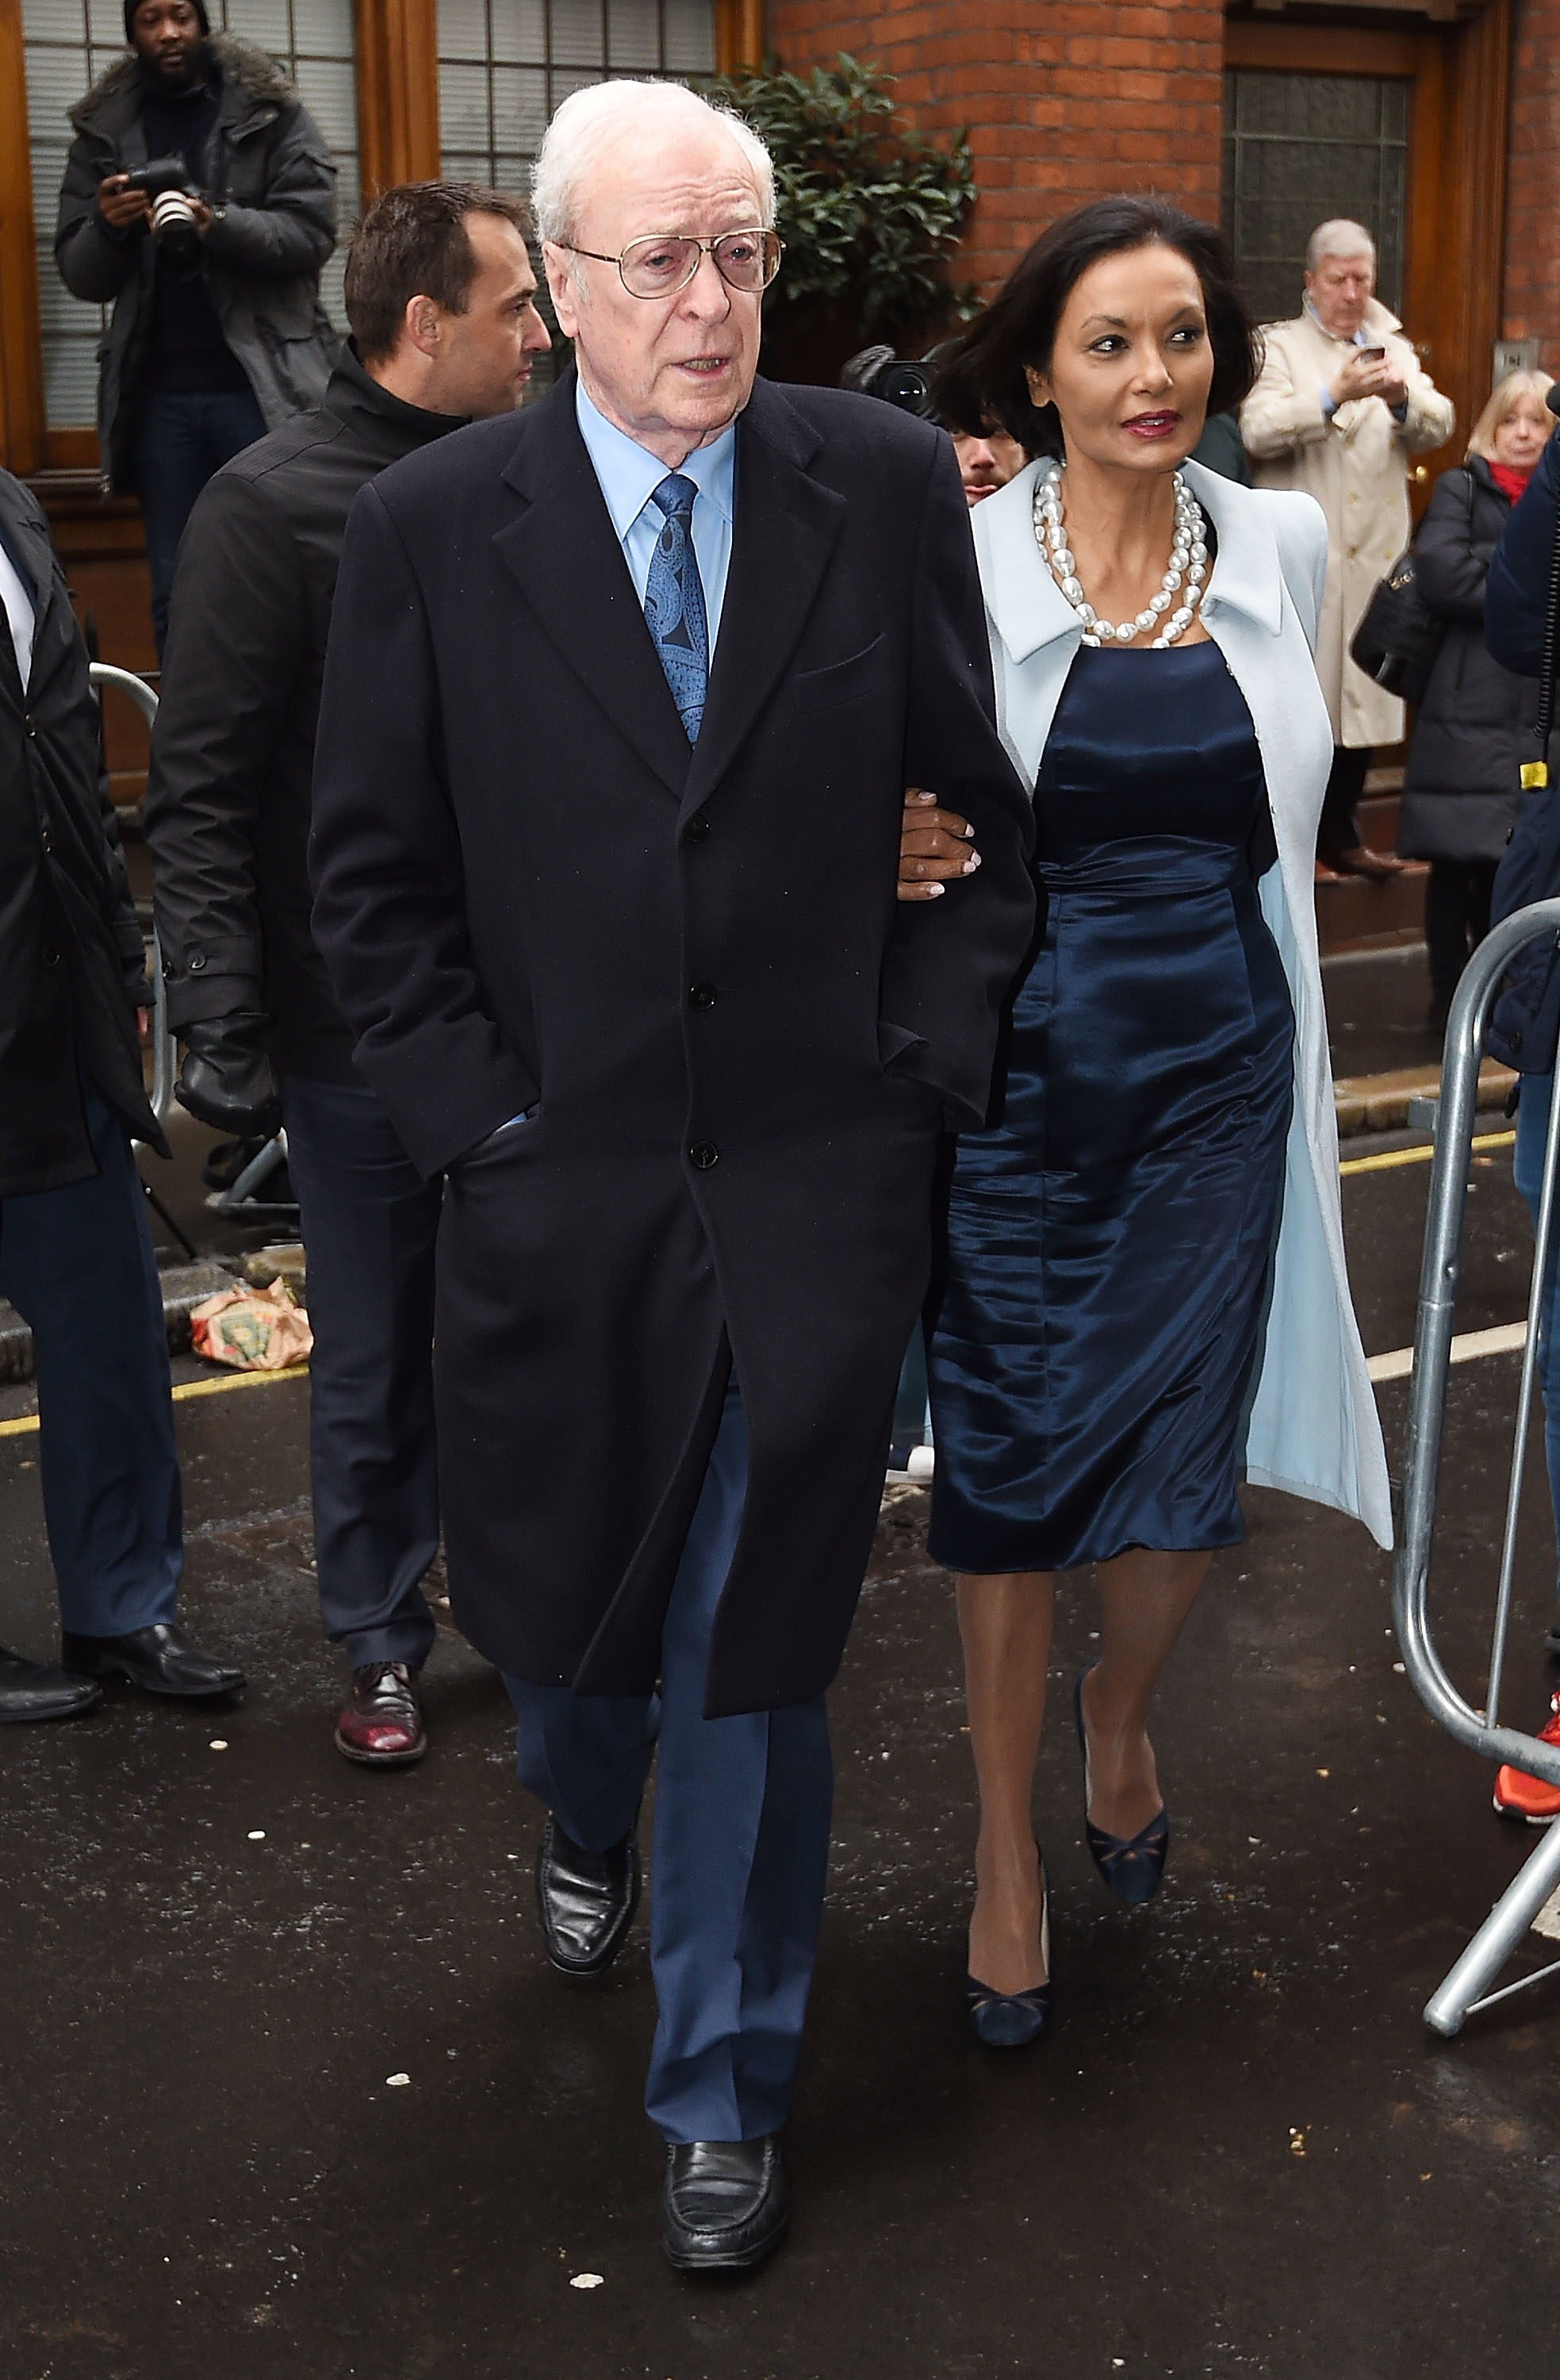 Sir Michael Caine and his wife Shakira Caine at St Brides Church, Fleet Street, on March 5, 2016 in London, England. | Source: Getty Images